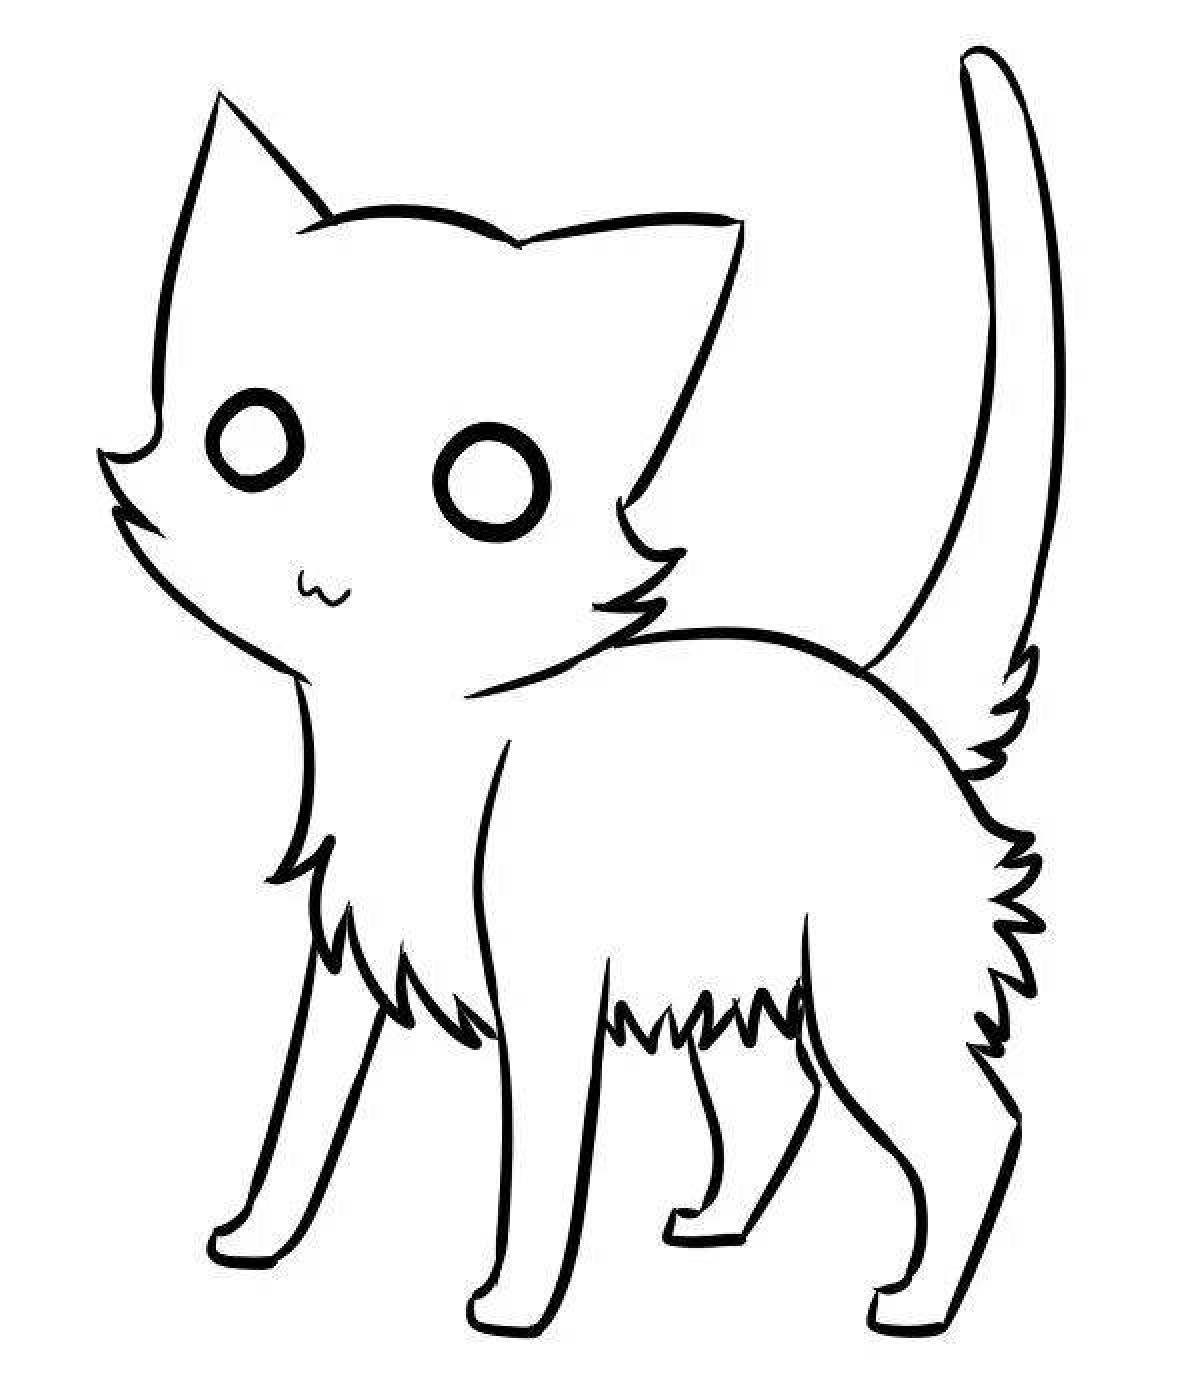 Coloring book royal anime cat